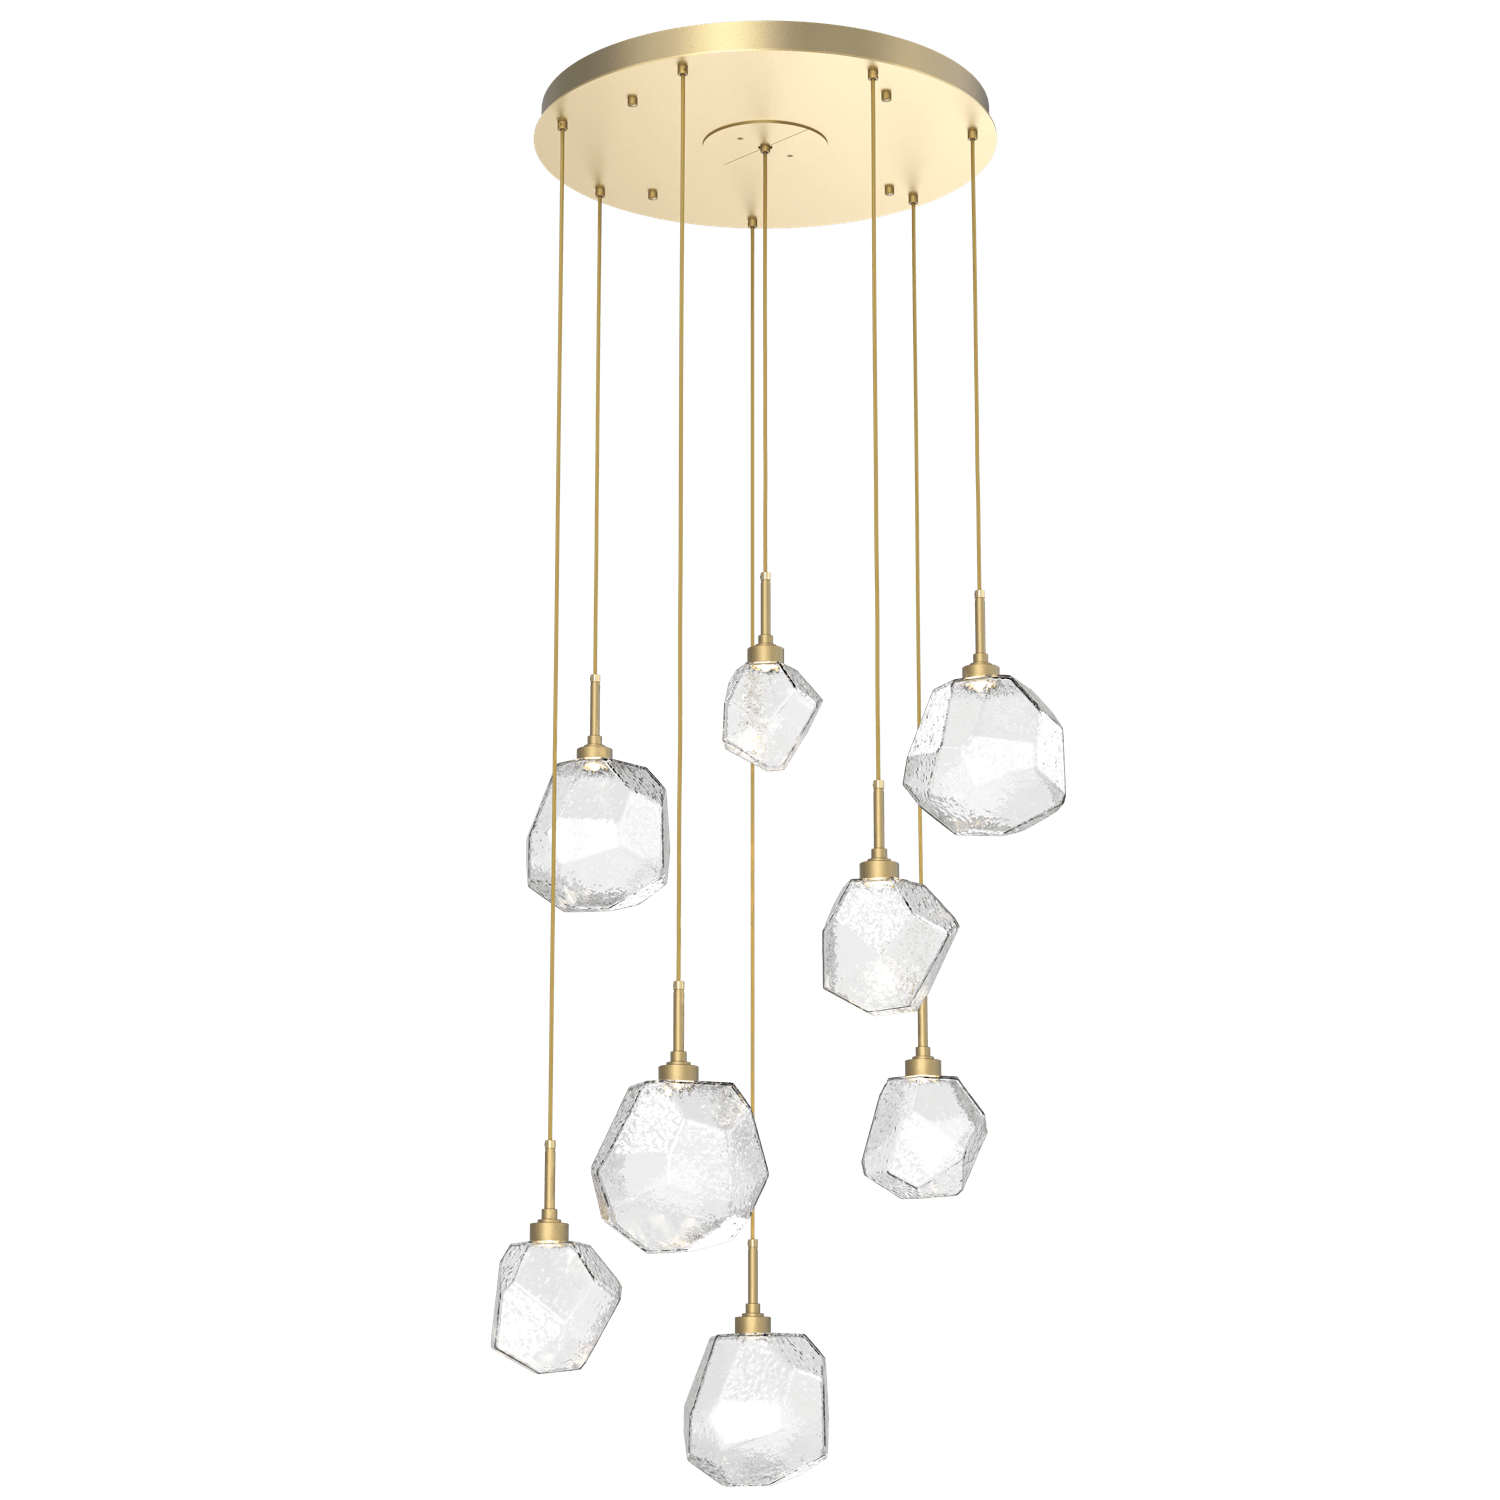 CHB0039-08-GB-C-Hammerton-Studio-Gem-8-light-round-pendant-chandelier-with-gilded-brass-finish-and-clear-blown-glass-shades-and-LED-lamping